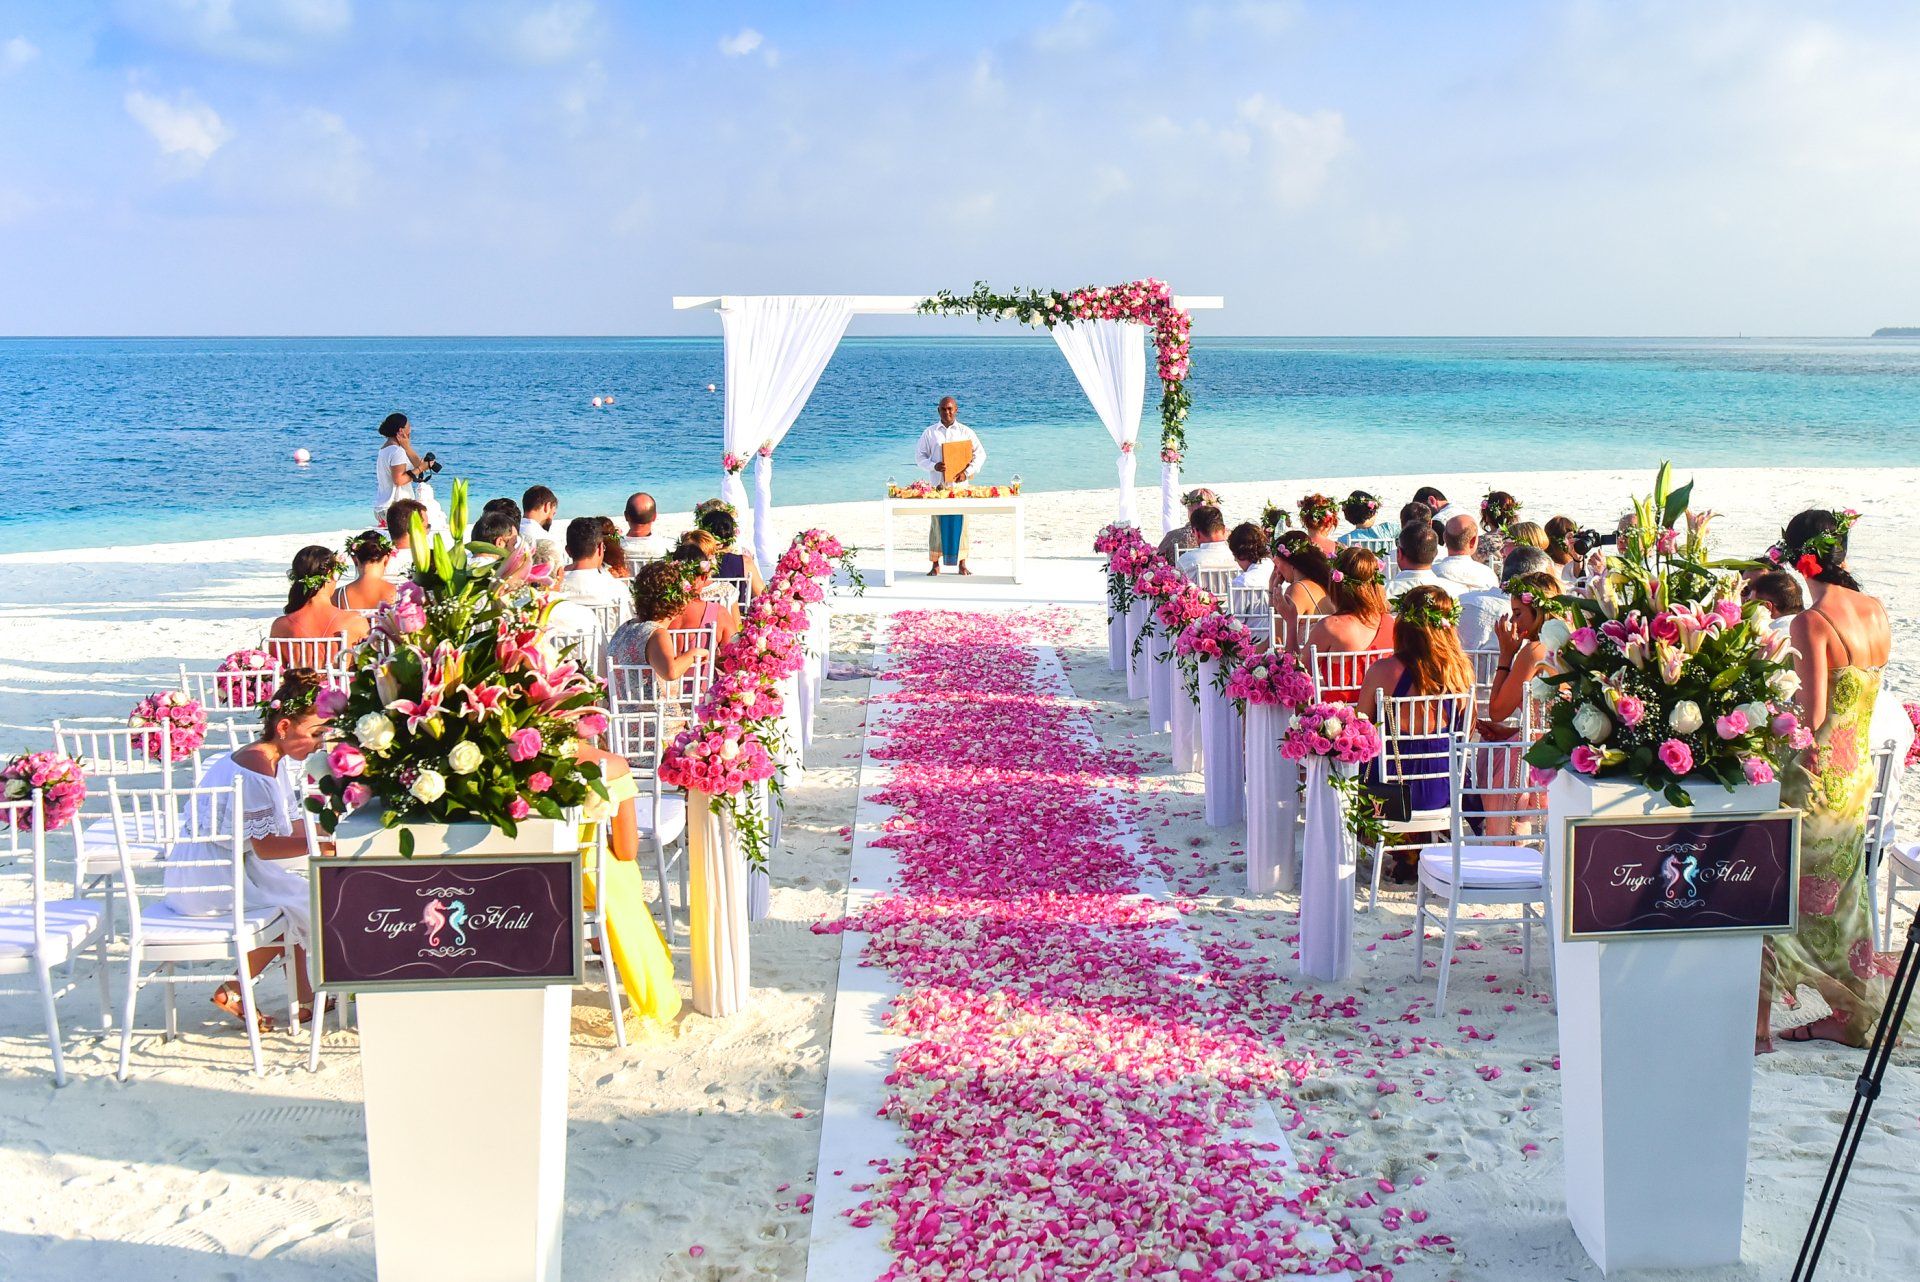 a wedding ceremony on the beach with guests seated in chairs